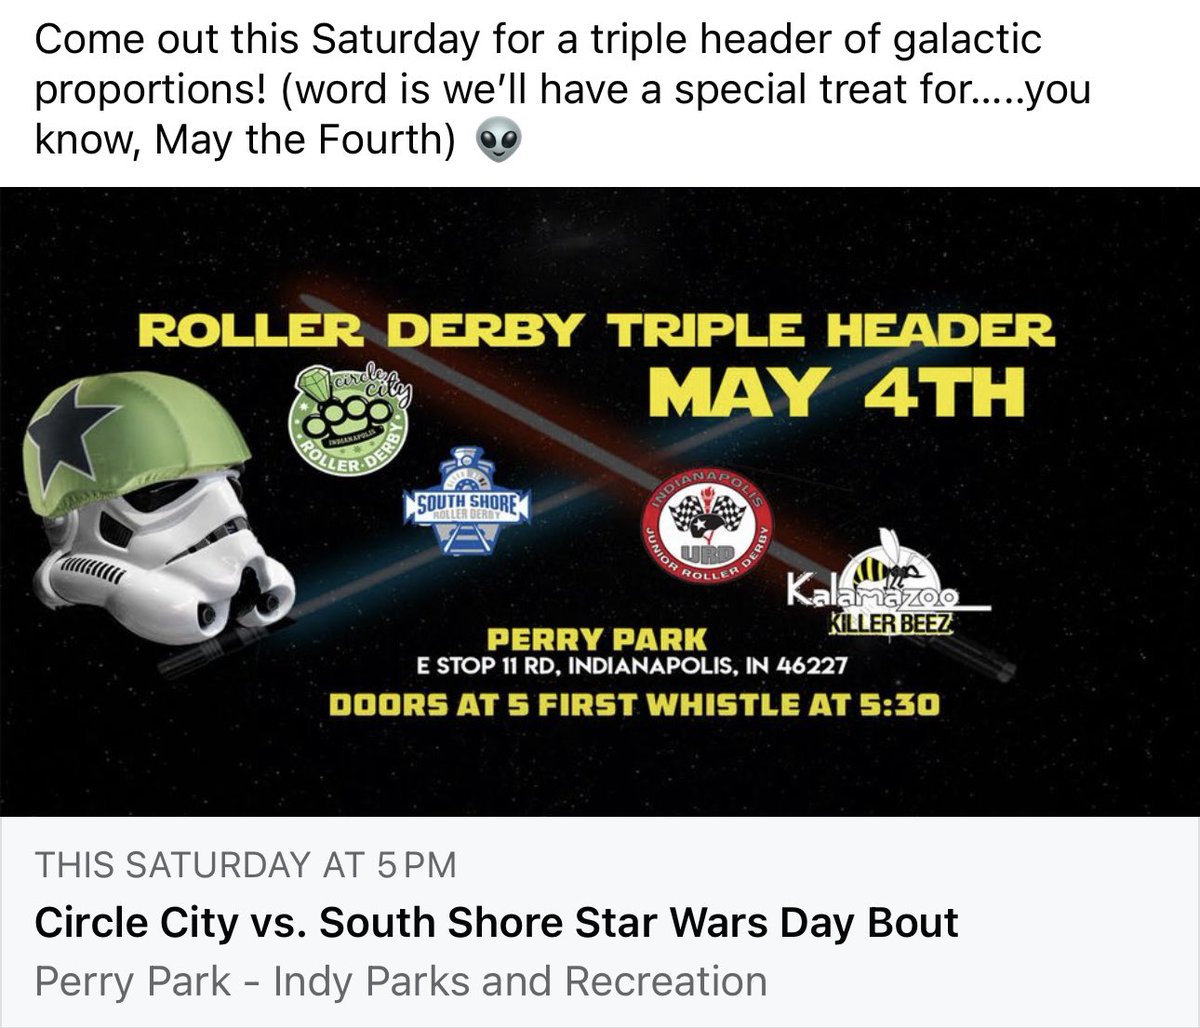 #rollerderby #maythe4th #maythe4thbewithyou #craftbeer #planetarybrewing #indiana